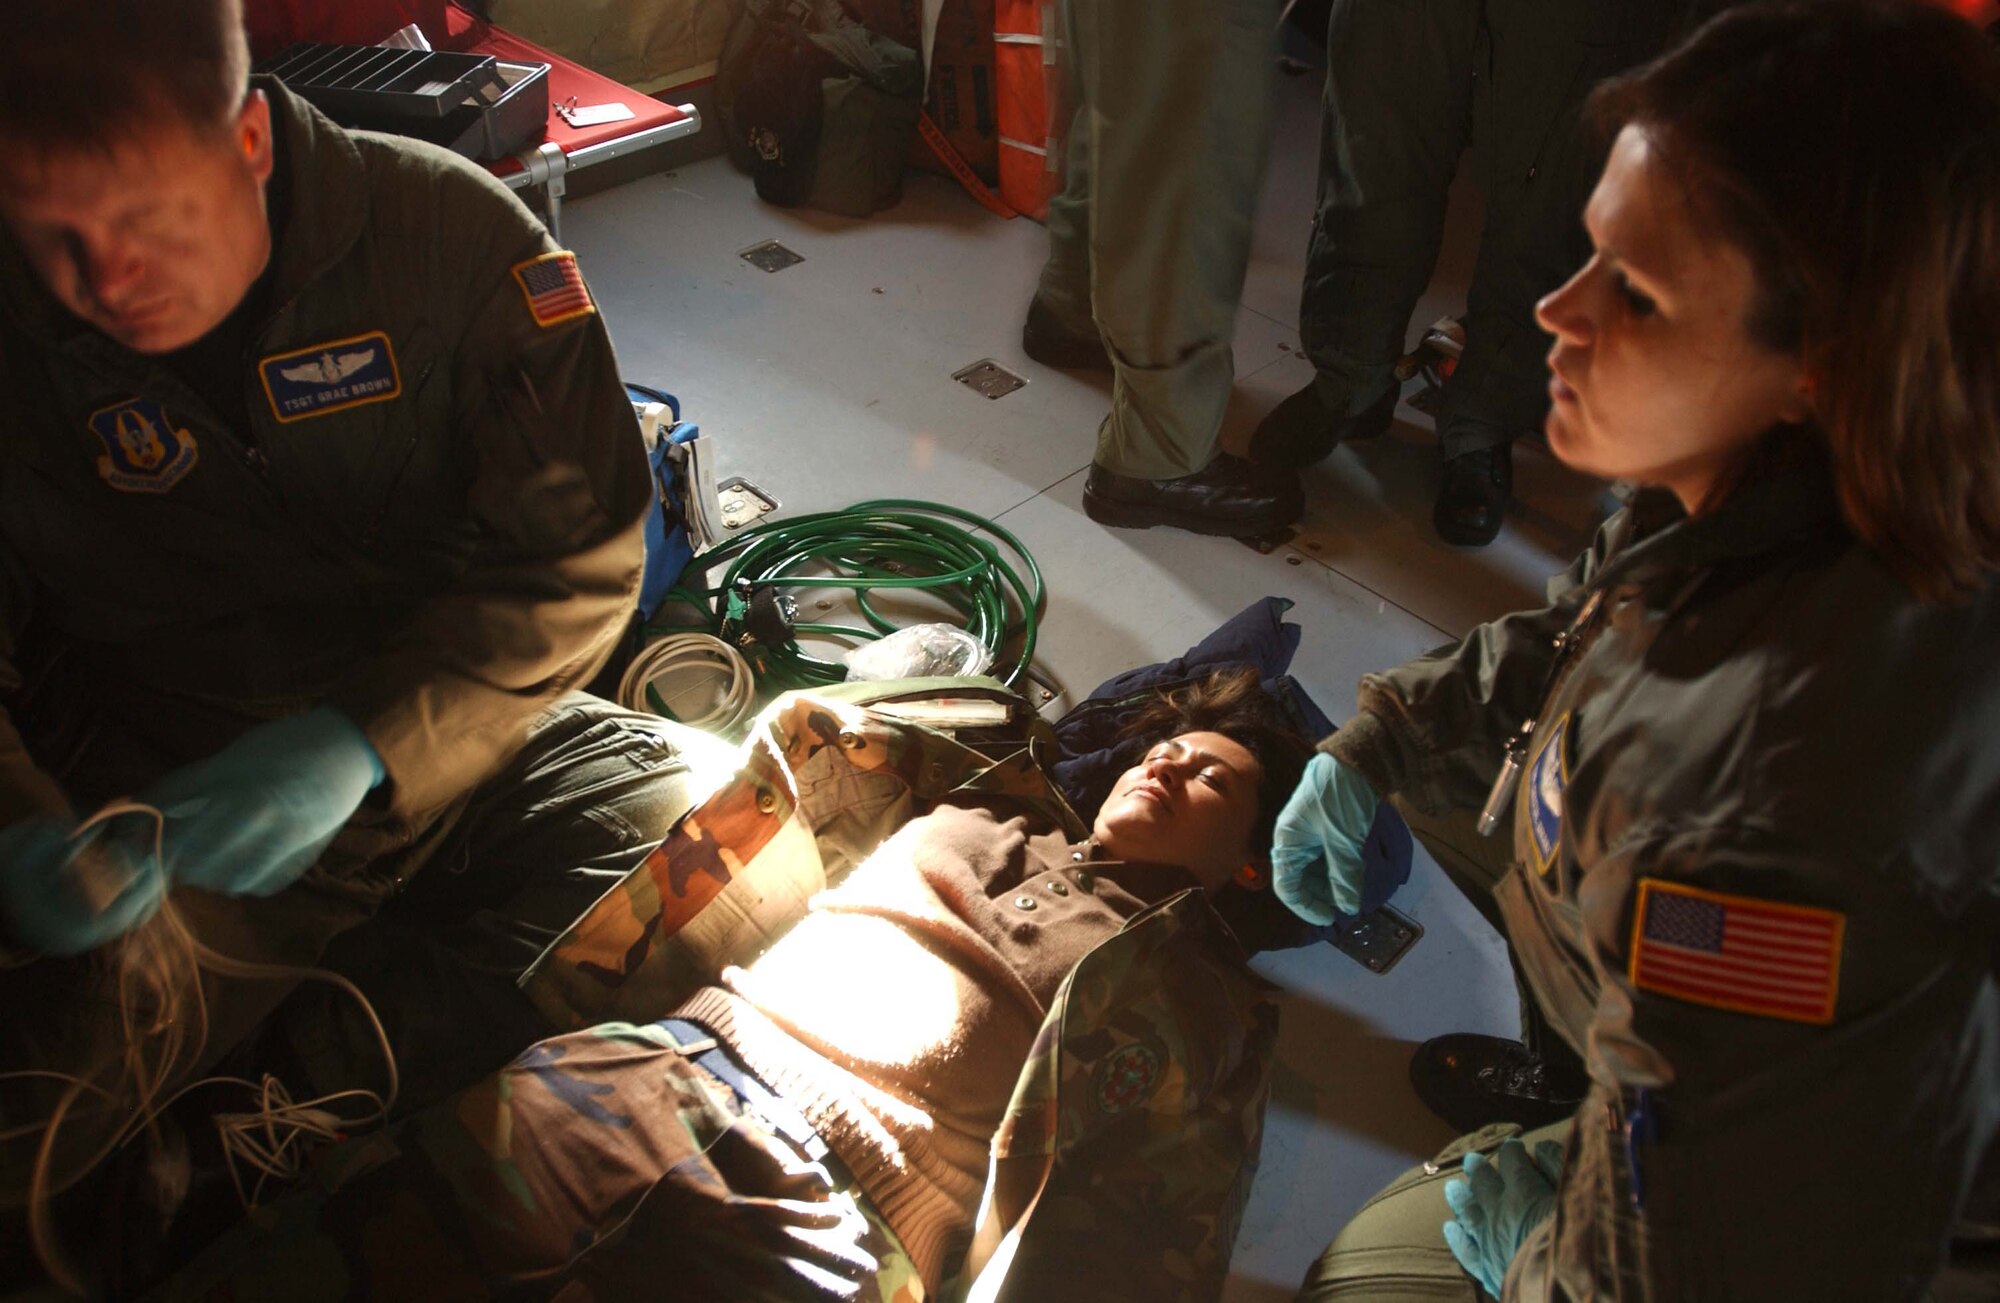 ST. CROIX, U.S. VIRGIN ISLANDS -- Tech. Sgts. Grae Brown and Crystal Drake, 459th Aeromedical Evacuation Squadron medical technicians, administer care to simulated patient Master Sgt. Patty Guzman-Evans, 459th AES first sergeant, during an in-flight exercise. Ten members of the 439th AES joined 459th AES members in a blended AE training mission to the island. Mission training expanded beyond the medical realm to include air refueling and an overseas sortie. (U.S. Air Force photo/Staff Sgt. Amaani Lyle)